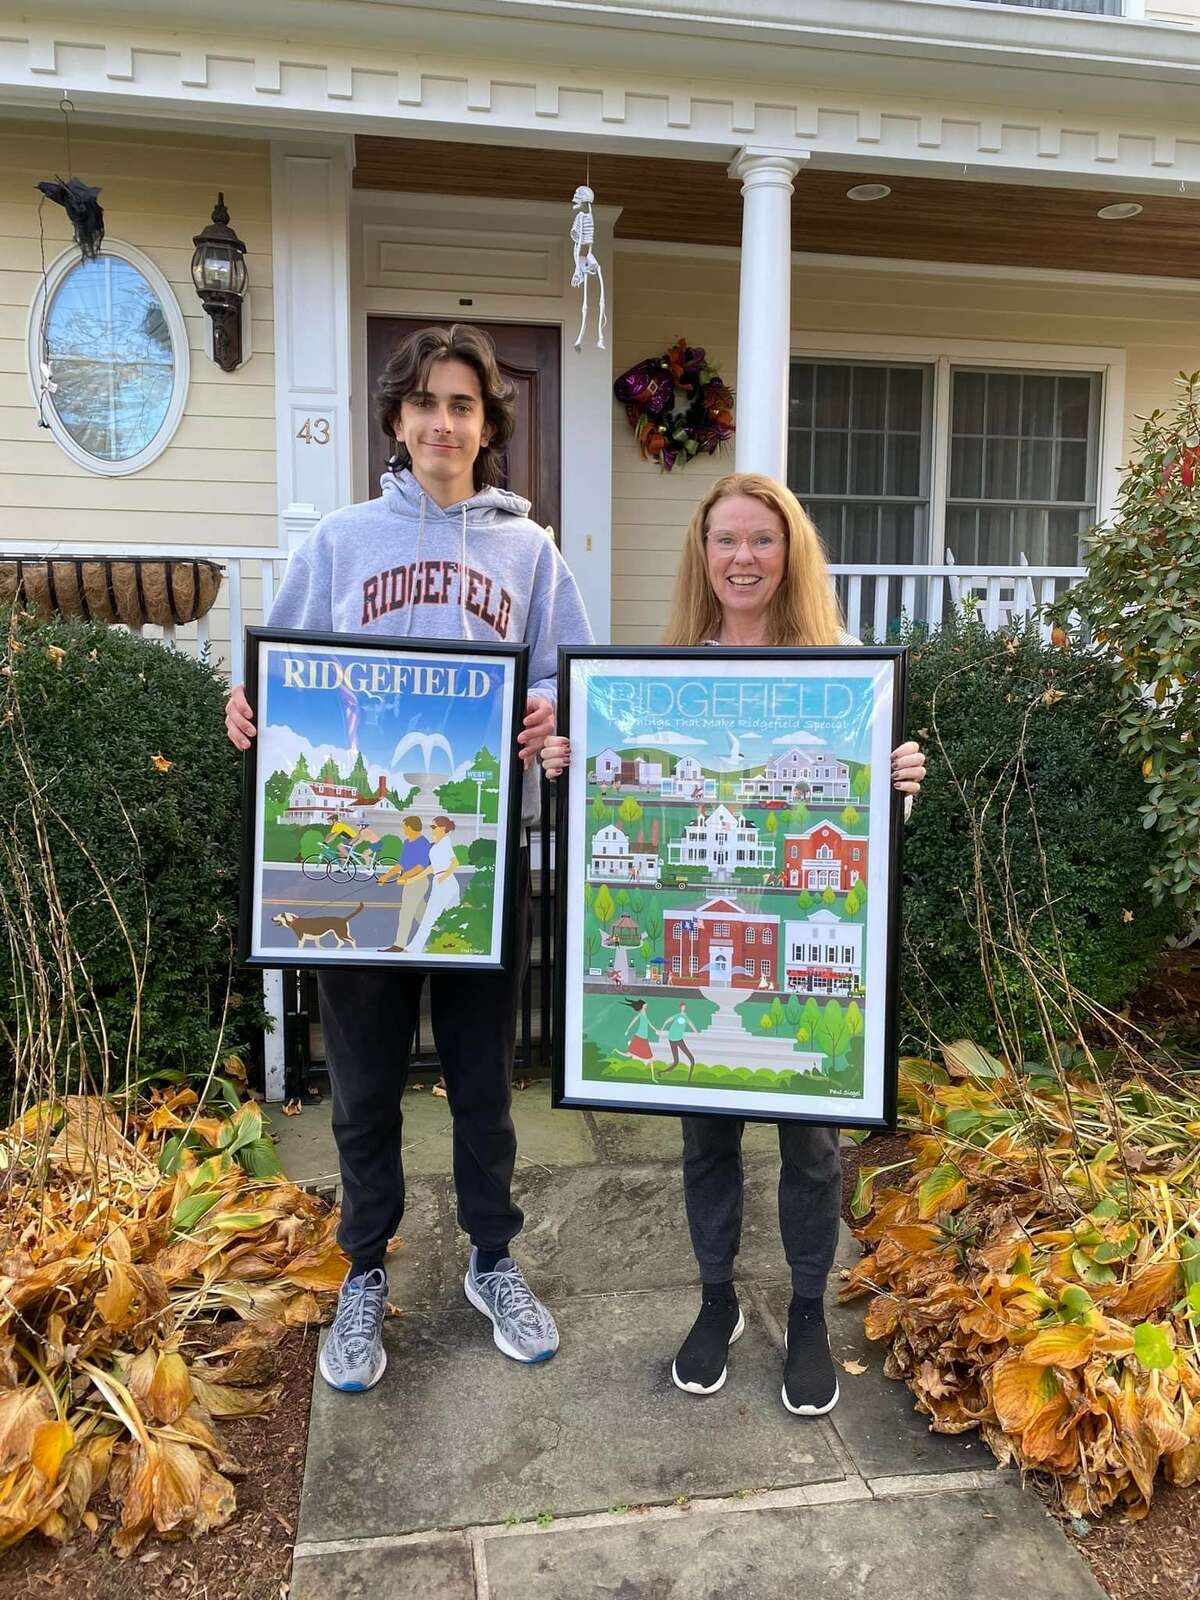 Luke Boylan, founder of GivingArt, has an online platform offering Ridgefield-themed posters designed by local artist Paul Siegel to raise money to support Rides for Ridgefield.